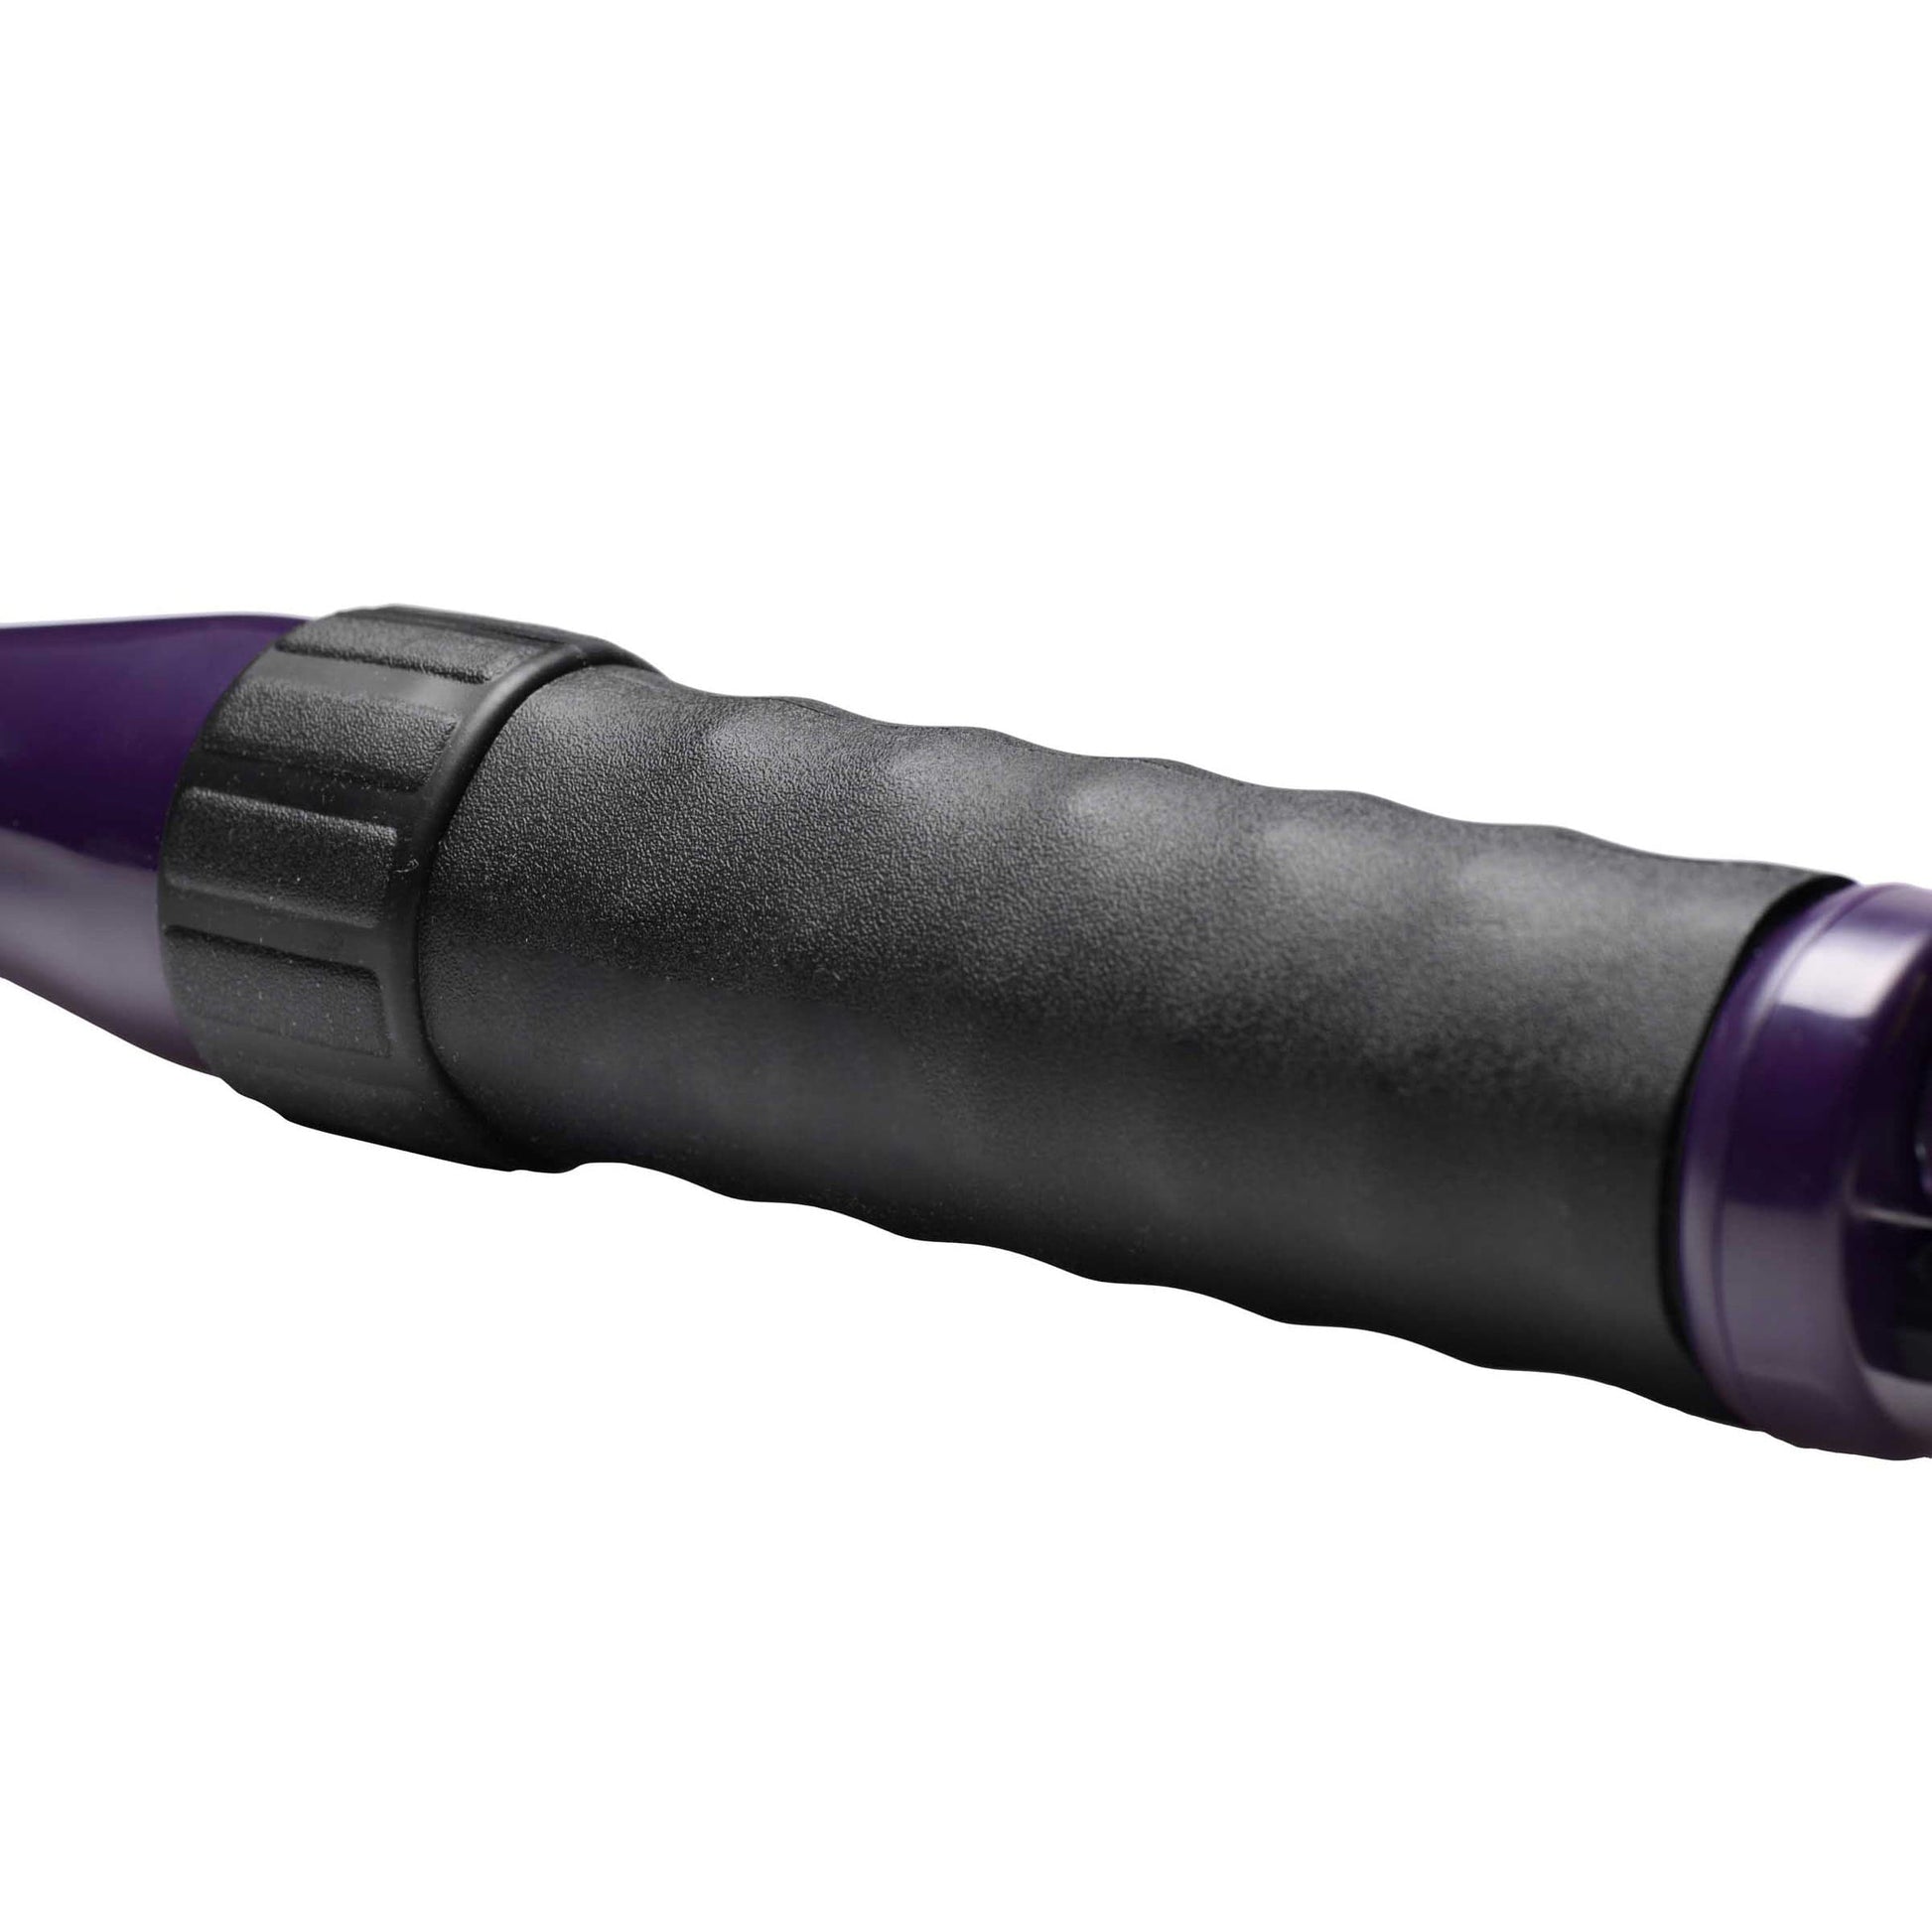 Zeus Deluxe Edition Twilight Violet Wand Kit - The Haus of Shag